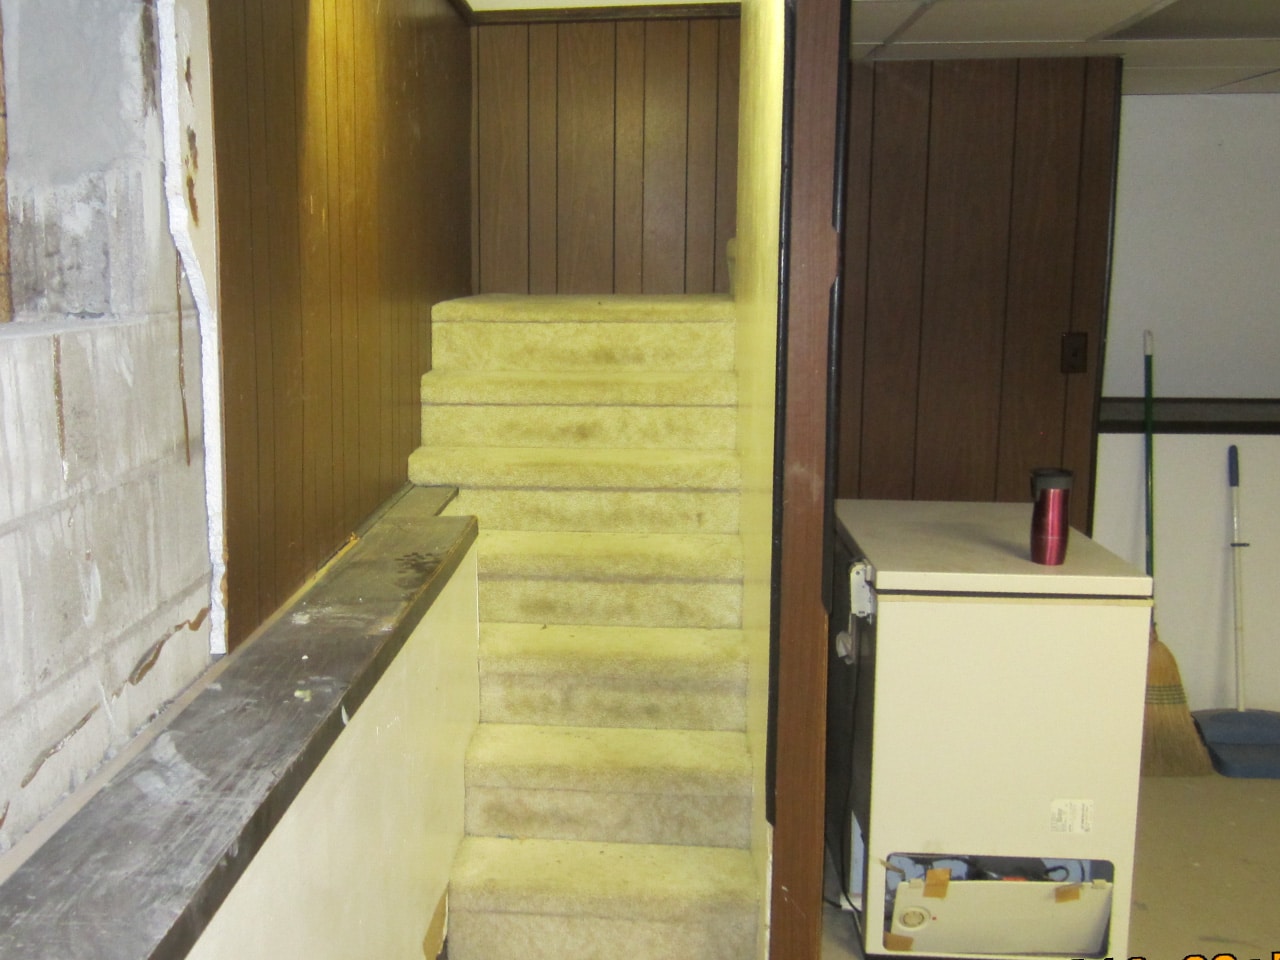 ‘Before’ picture of old carpeted stairs leading to basement